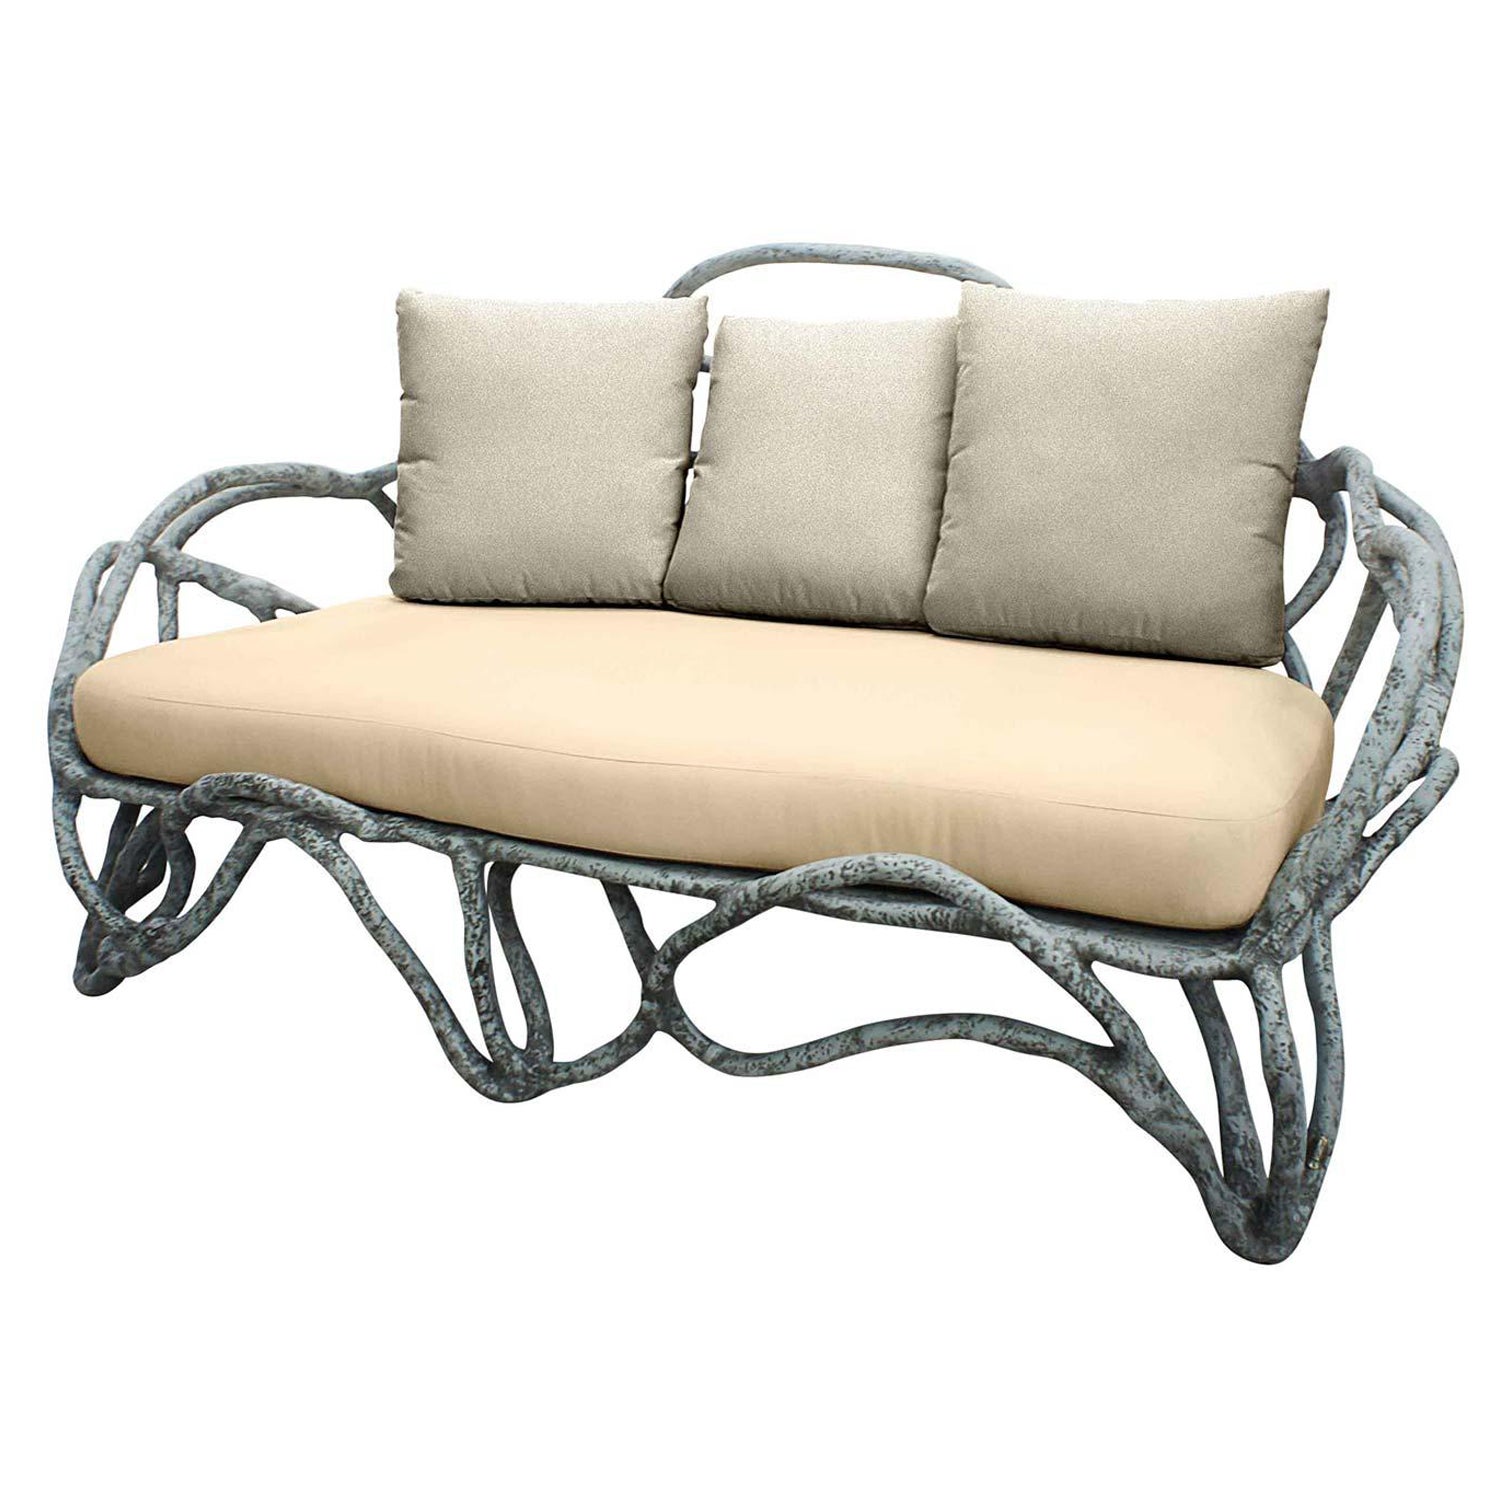 Biomorphic Style Outdoor Sofa in Antique Finish For Sale